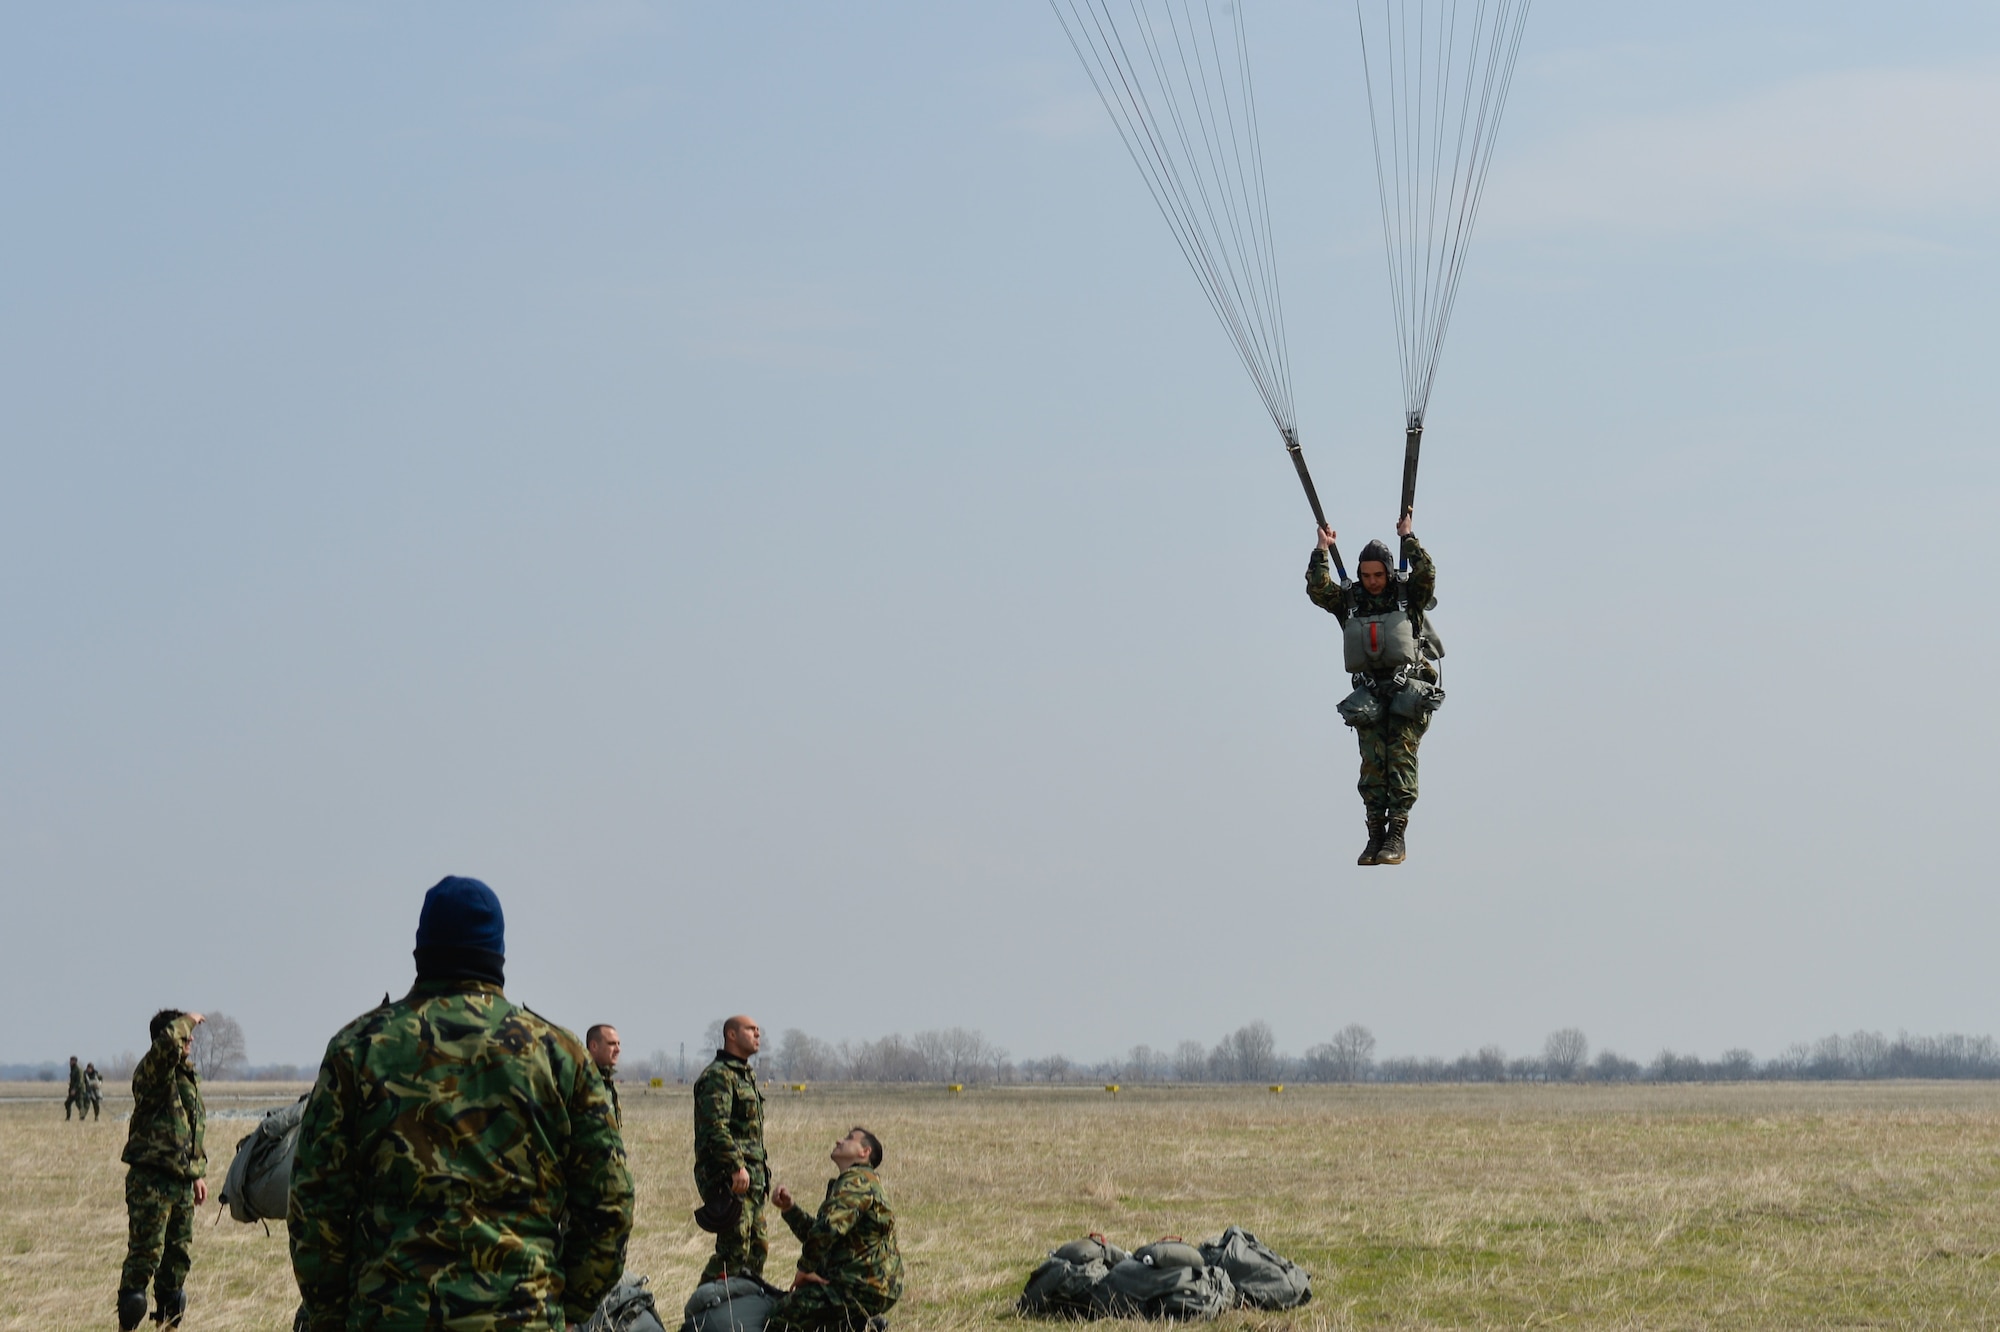 A Bulgarian paratrooper descends from a C-130J Super Hercules during Exercise Thracian Spring 17 at Plovdiv Regional Airport, Bulgaria, March 15, 2017. Airmen from the 37th Airlift Squadron, 435th Contingency Response Group, and 86th Airlift Wing, Ramstein Air Base, Germany, partnered with the Bulgarian military for the two-week exercise. The U.S. Air Force’s forward presence in Europe allows Airmen to work hand-in-hand with Allies to develop and improve ready air forces that are capable of maintaining regional security.  (U.S. Air Force photo by Staff Sgt. Nesha Humes)